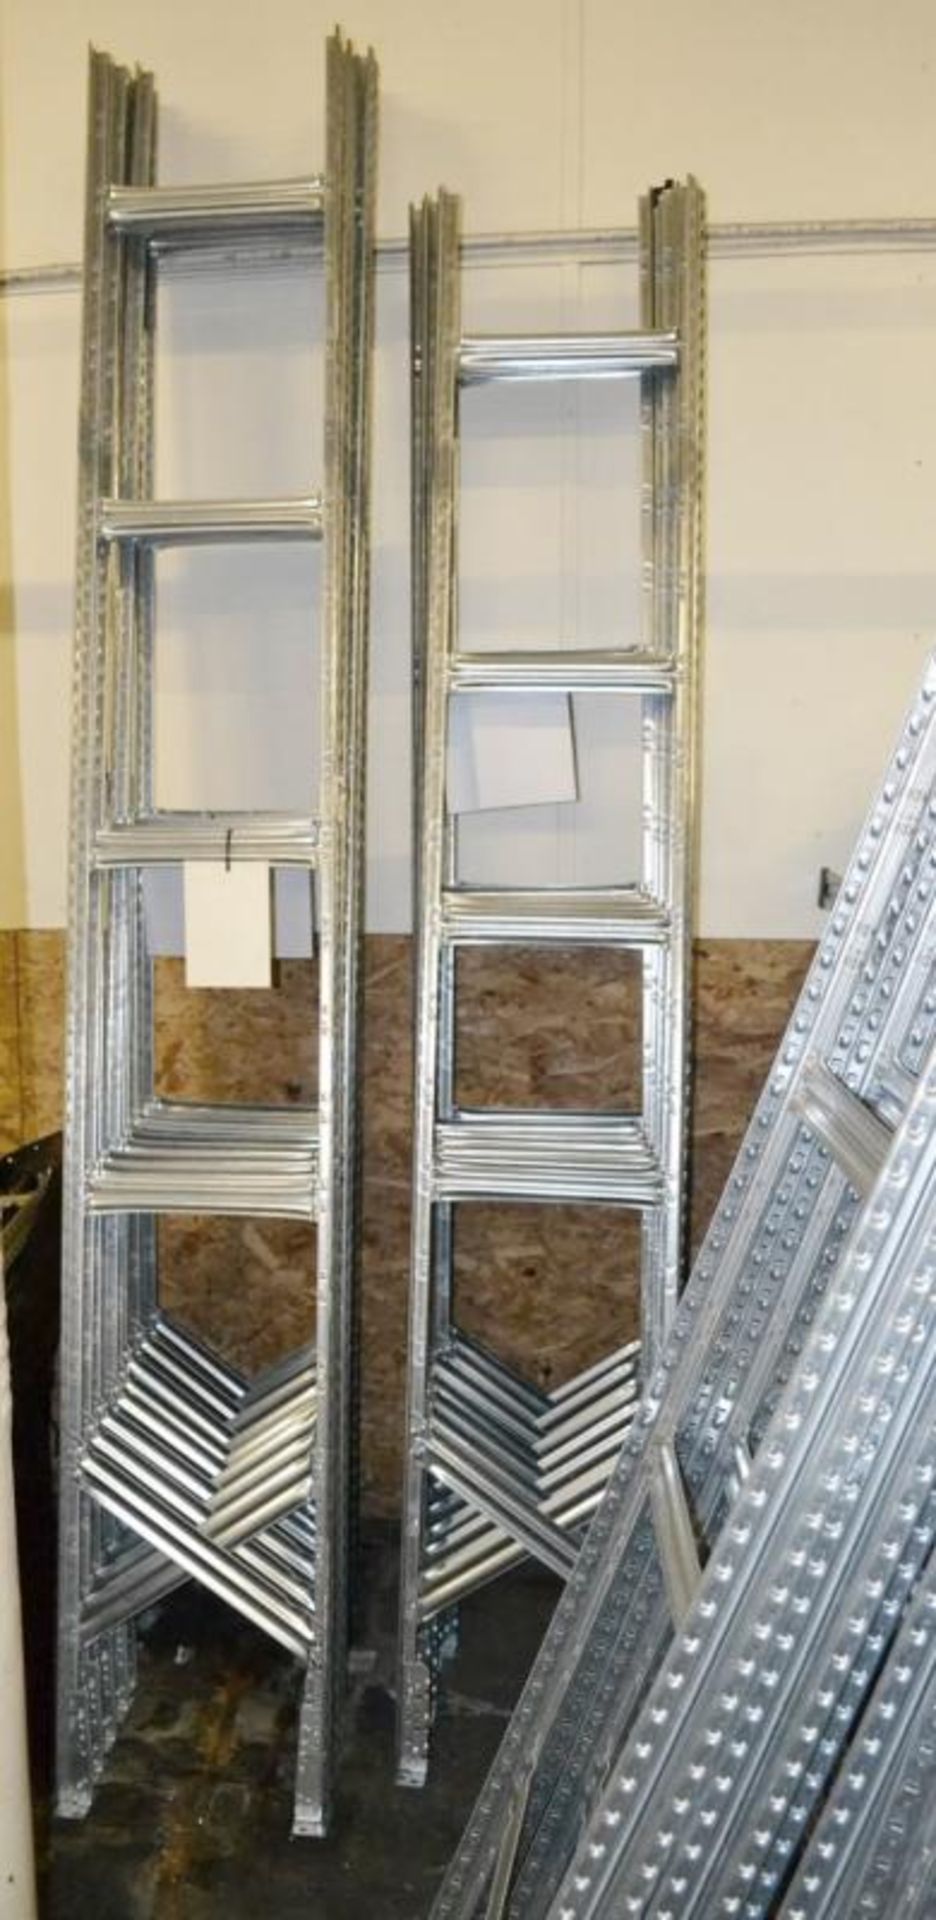 4 x Bays of Metalsistem Steel Modular Storage Shelving - Includes 37 Pieces - Recently Removed - Image 10 of 17